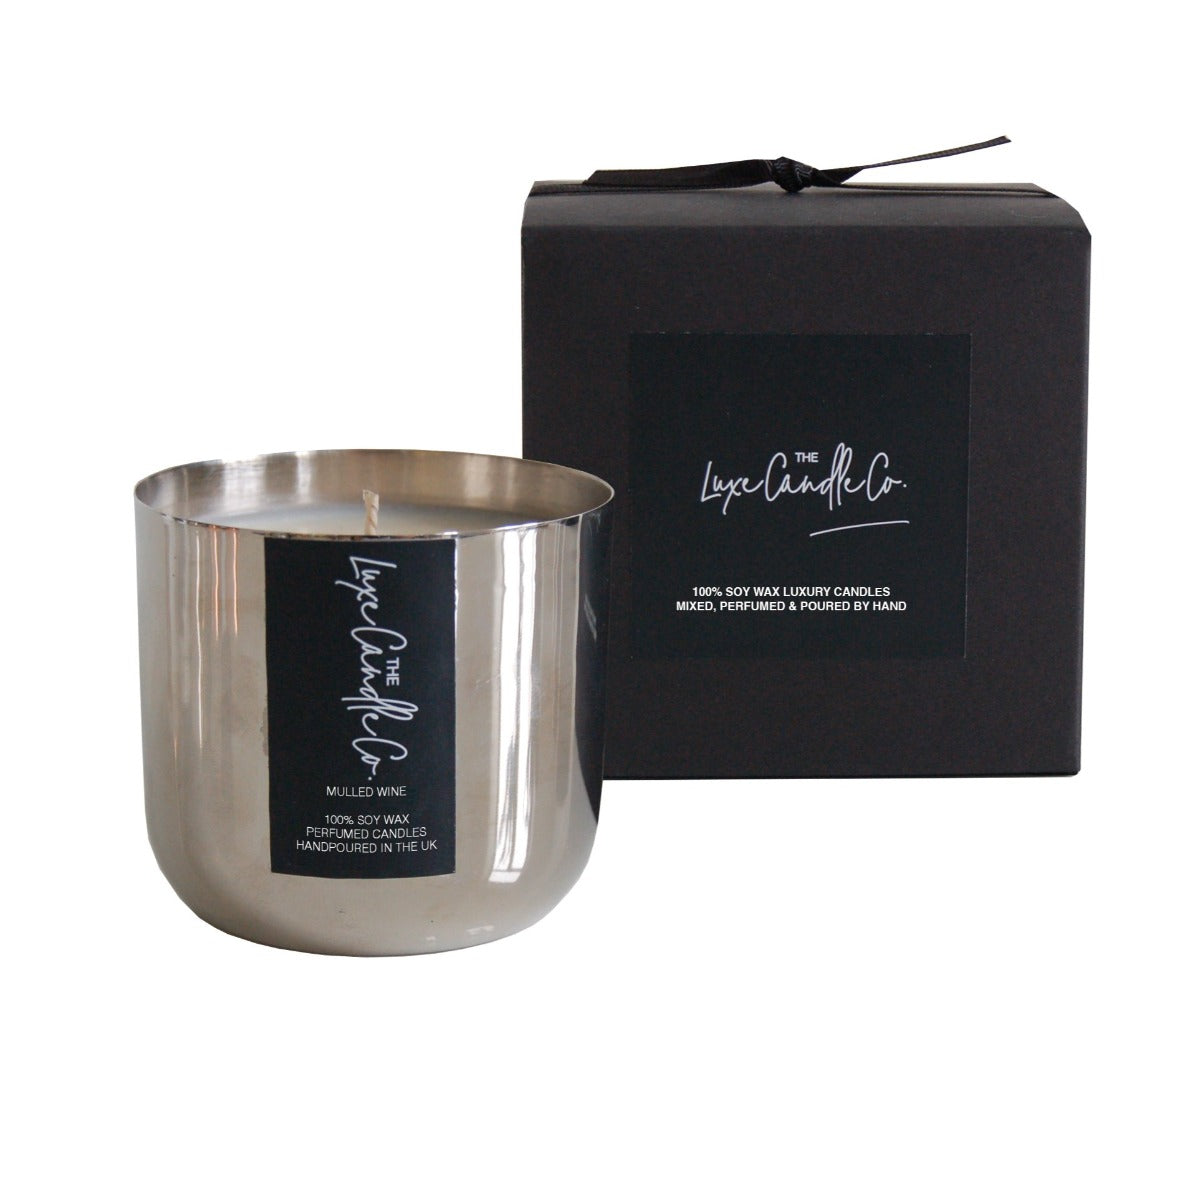 Silver Mulled wine soy wax scented candle